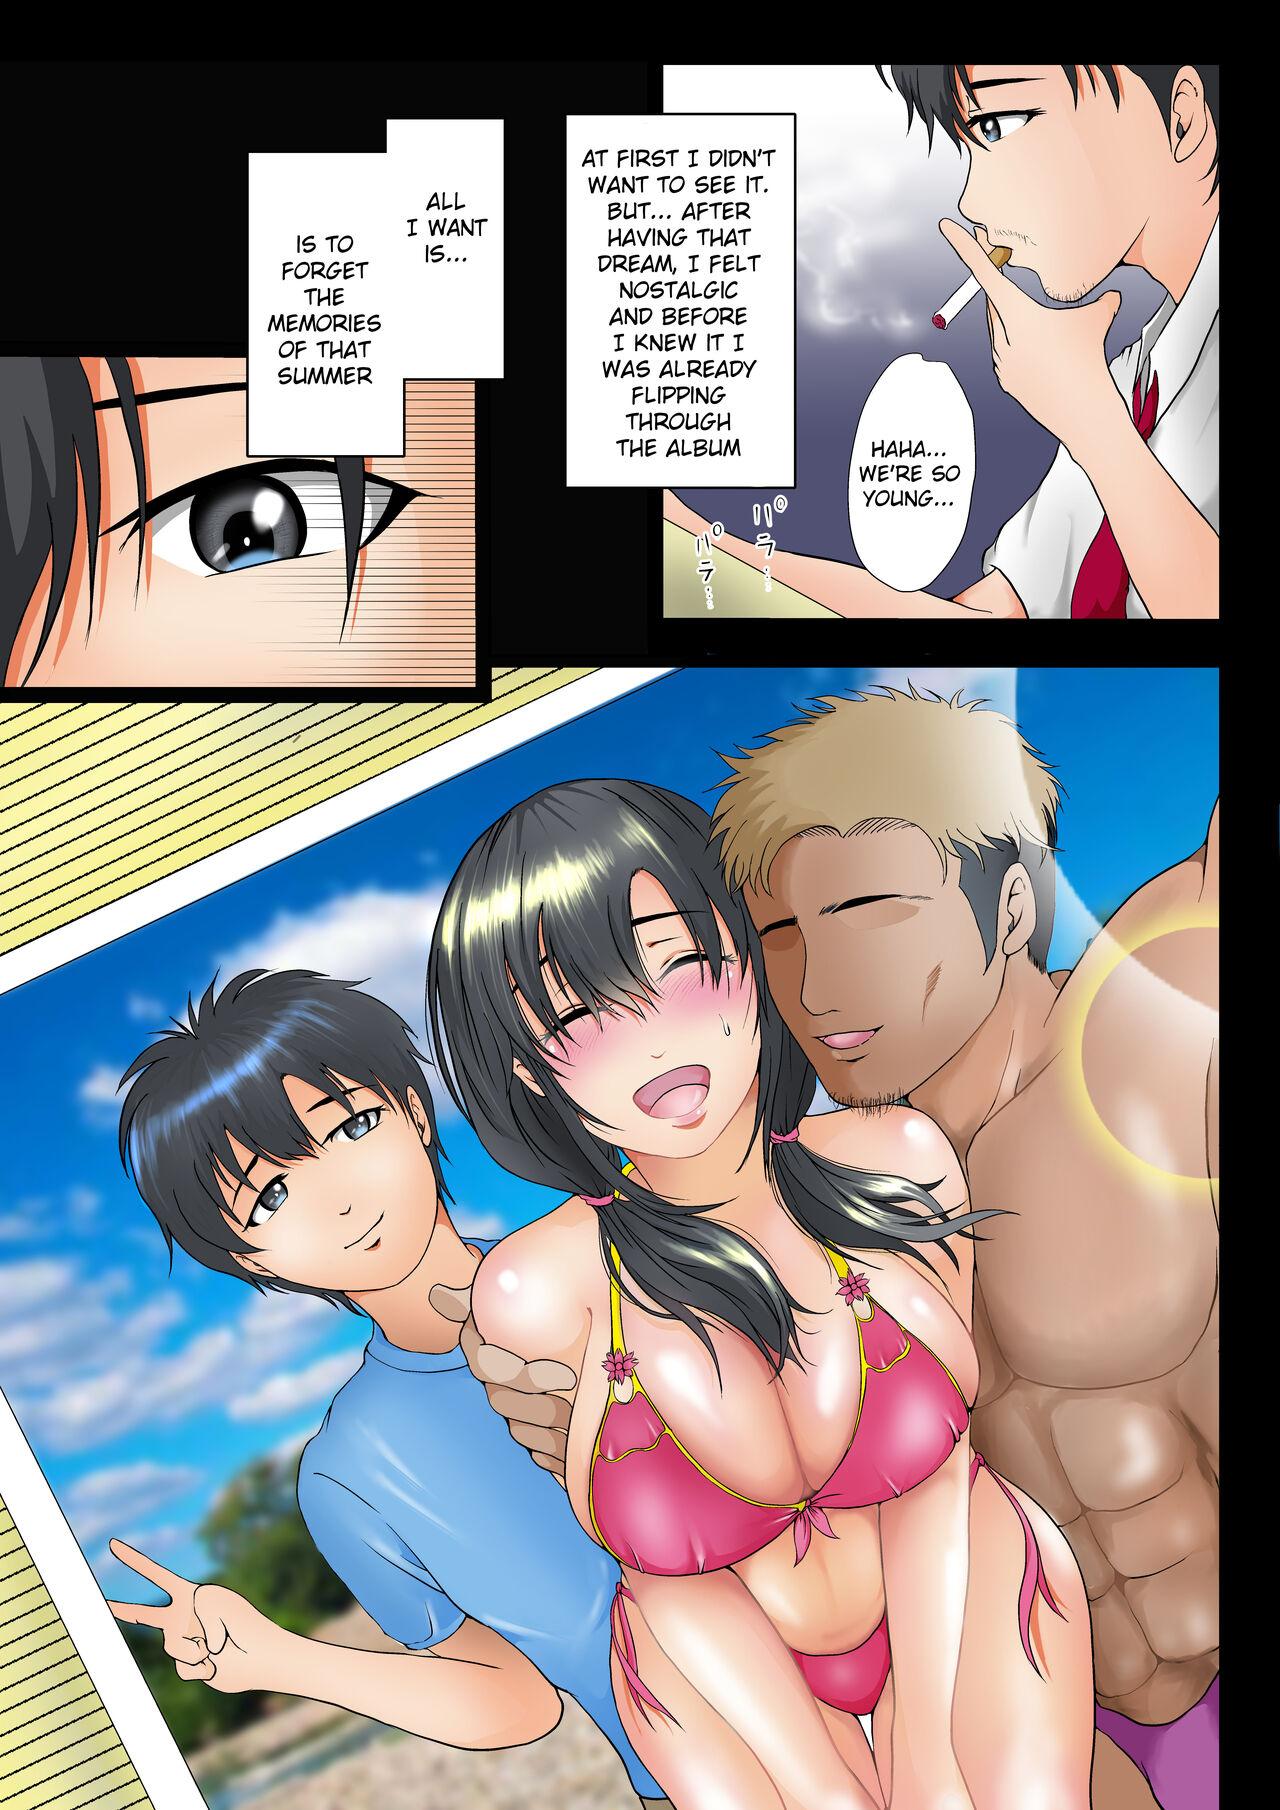 Double Penetration The reason why the bond with my childhood friend is broken so easily - Original Free - Page 6